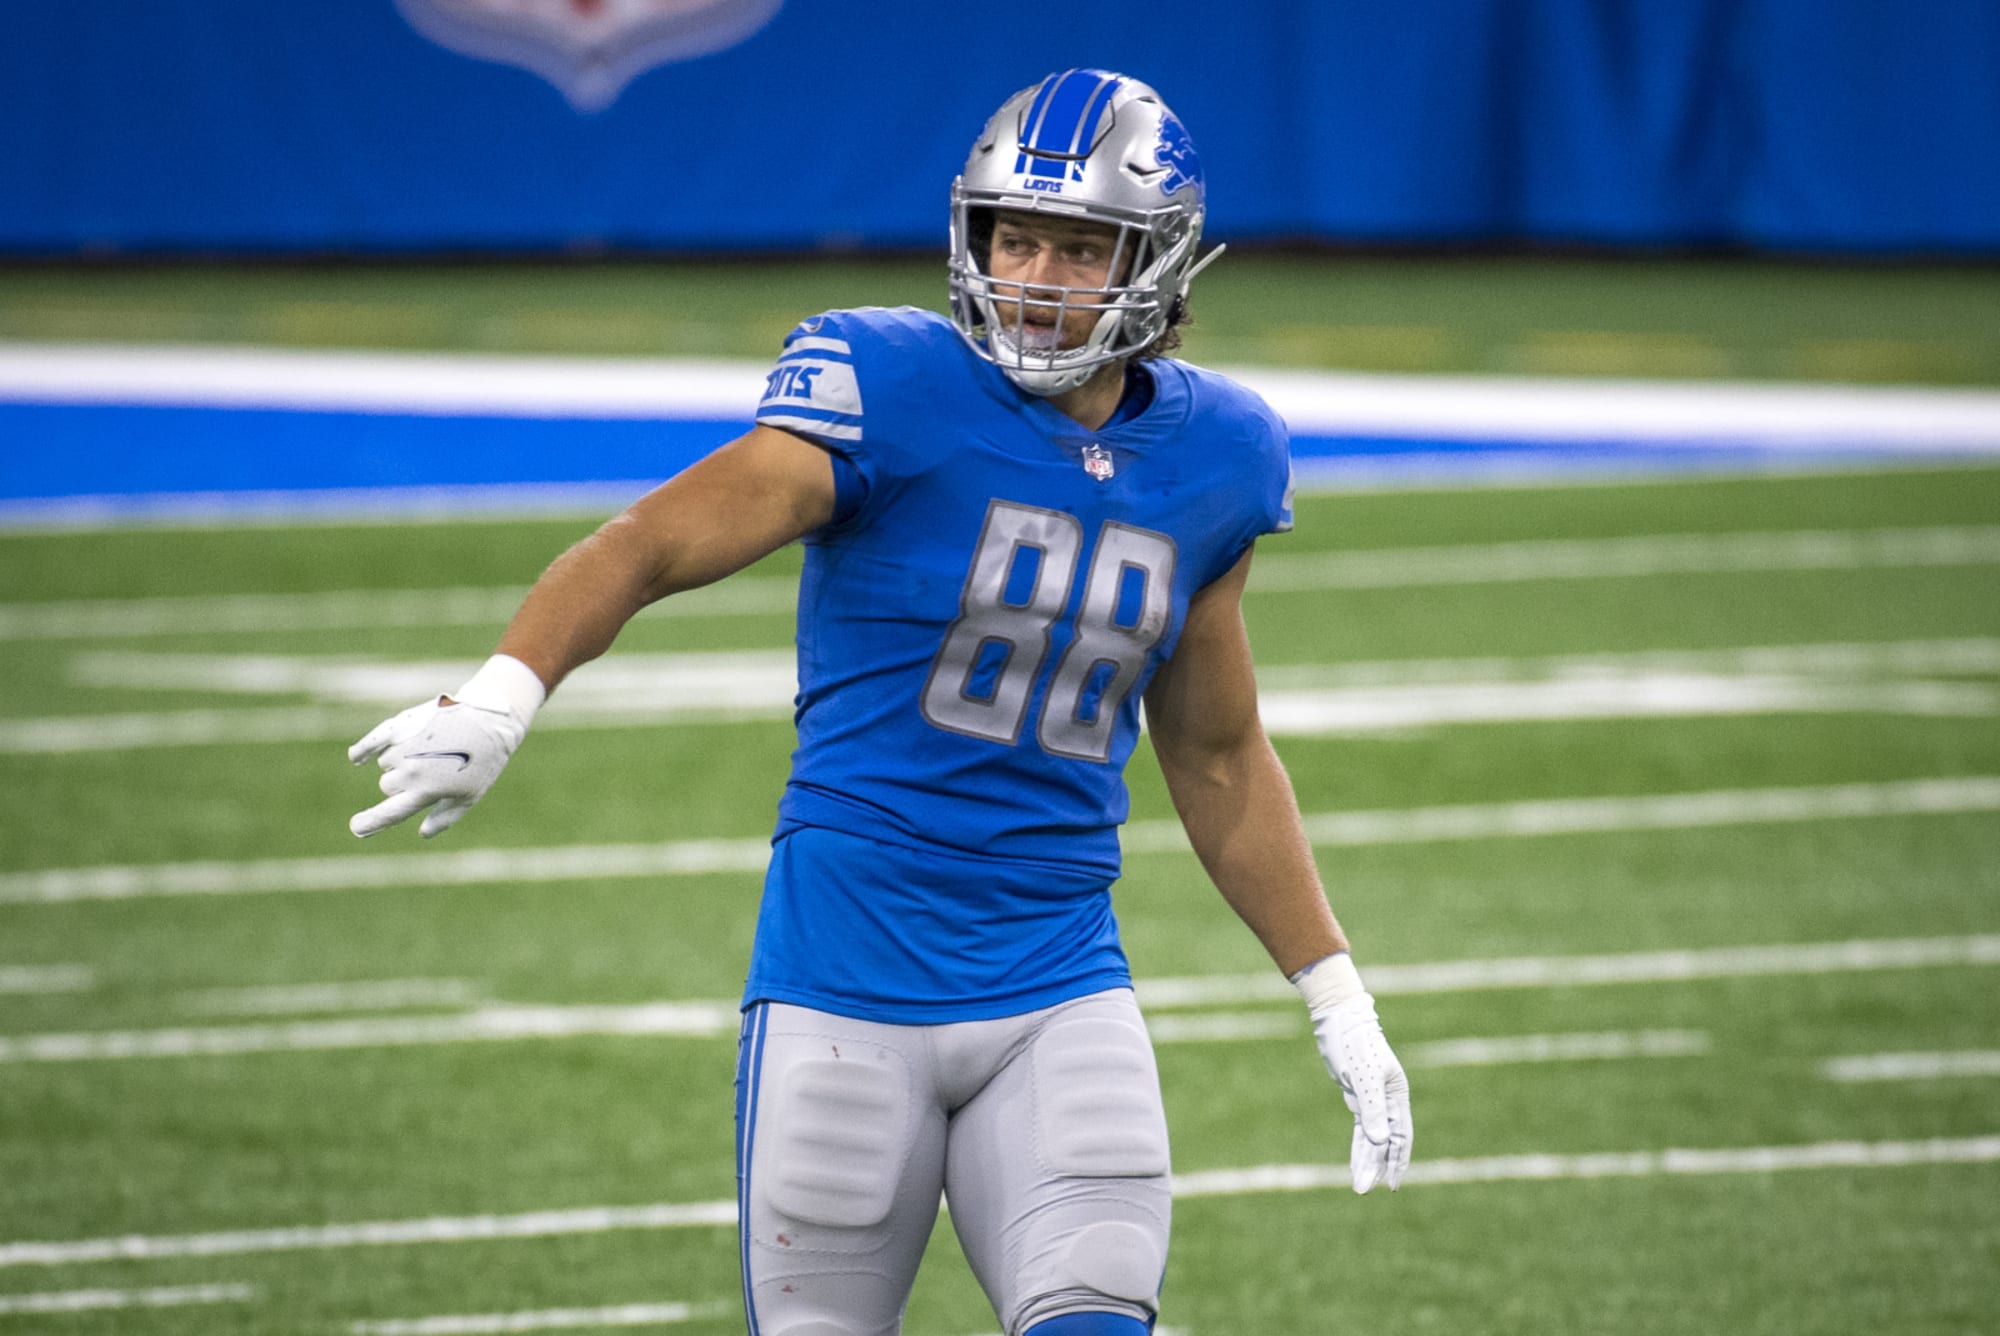 Detroit Lions: T.J. Hockenson's production set to explode in 2021